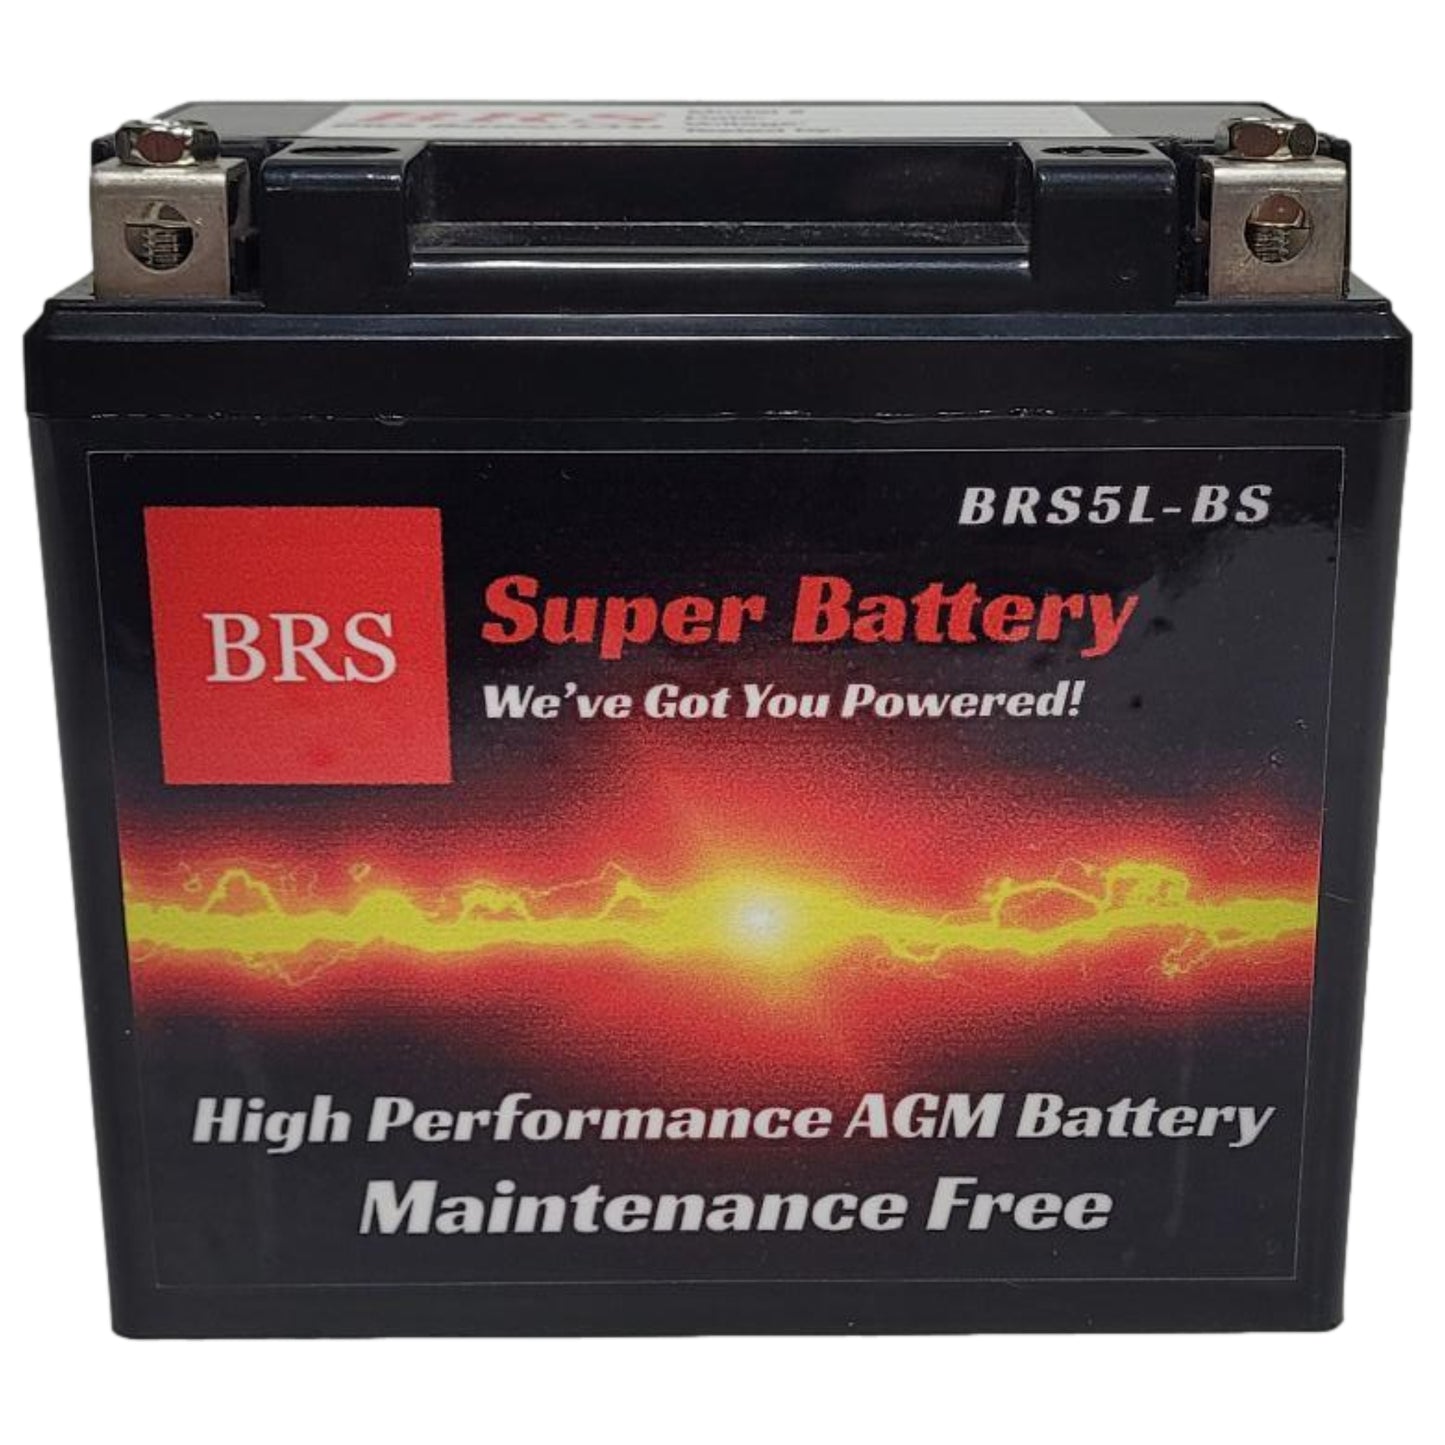 WPX5L-BS 12v High Performance Sealed AGM PowerSport 10 Year Battery - BRS Super Battery